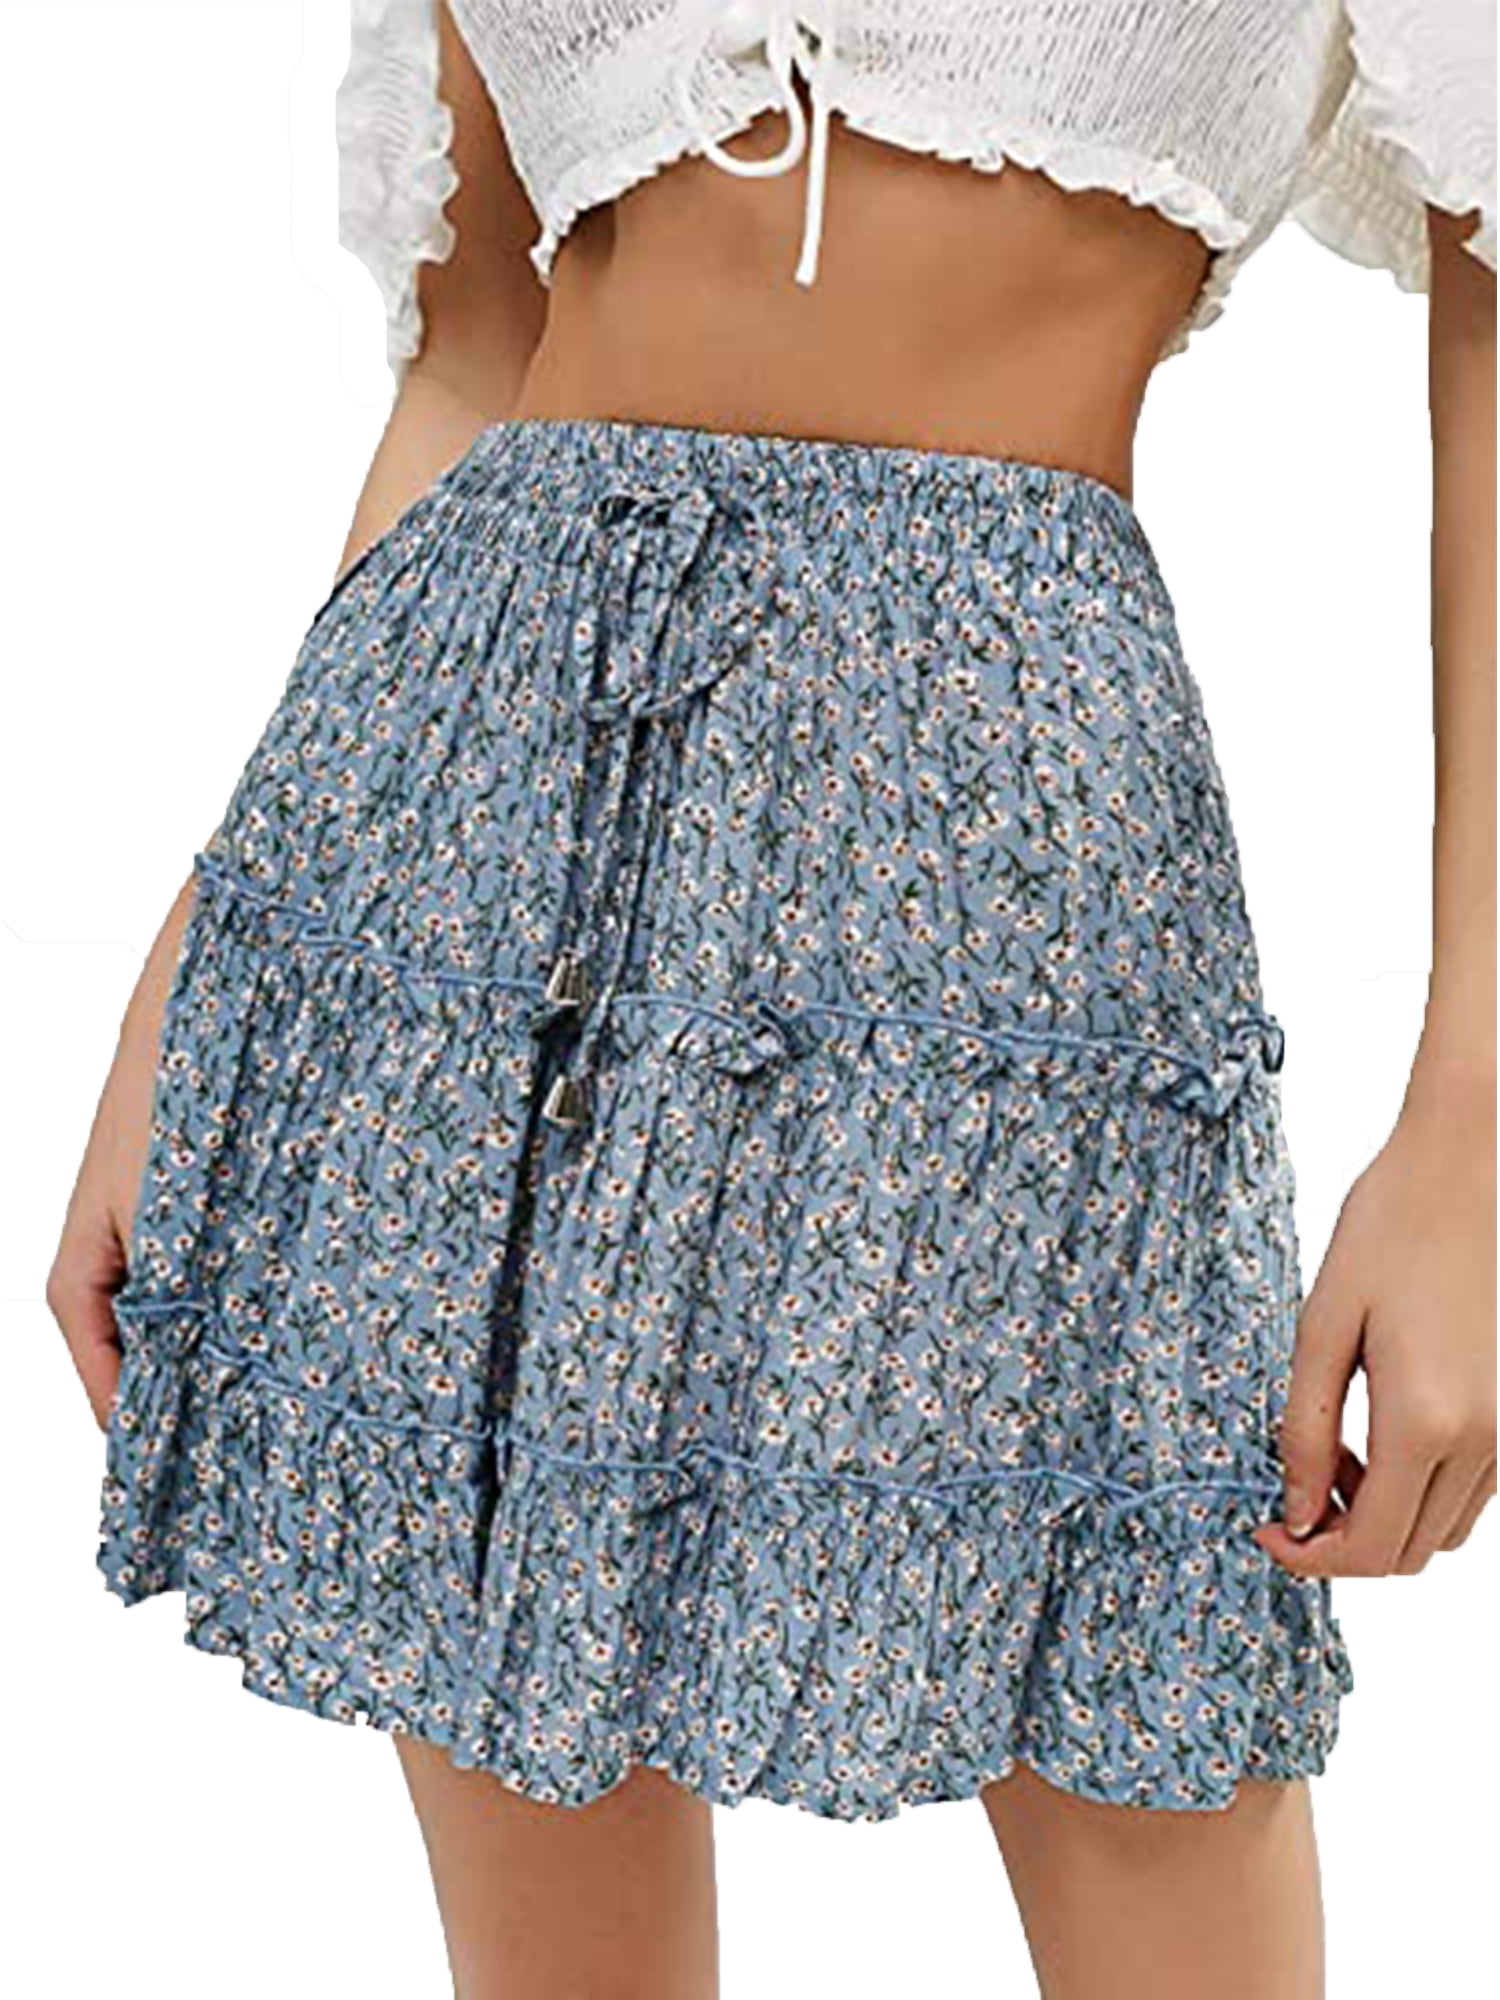 Womens Party Cocktail Mini Skirt Lady Summer Ruffle Pleated Skater Flared Skirt 